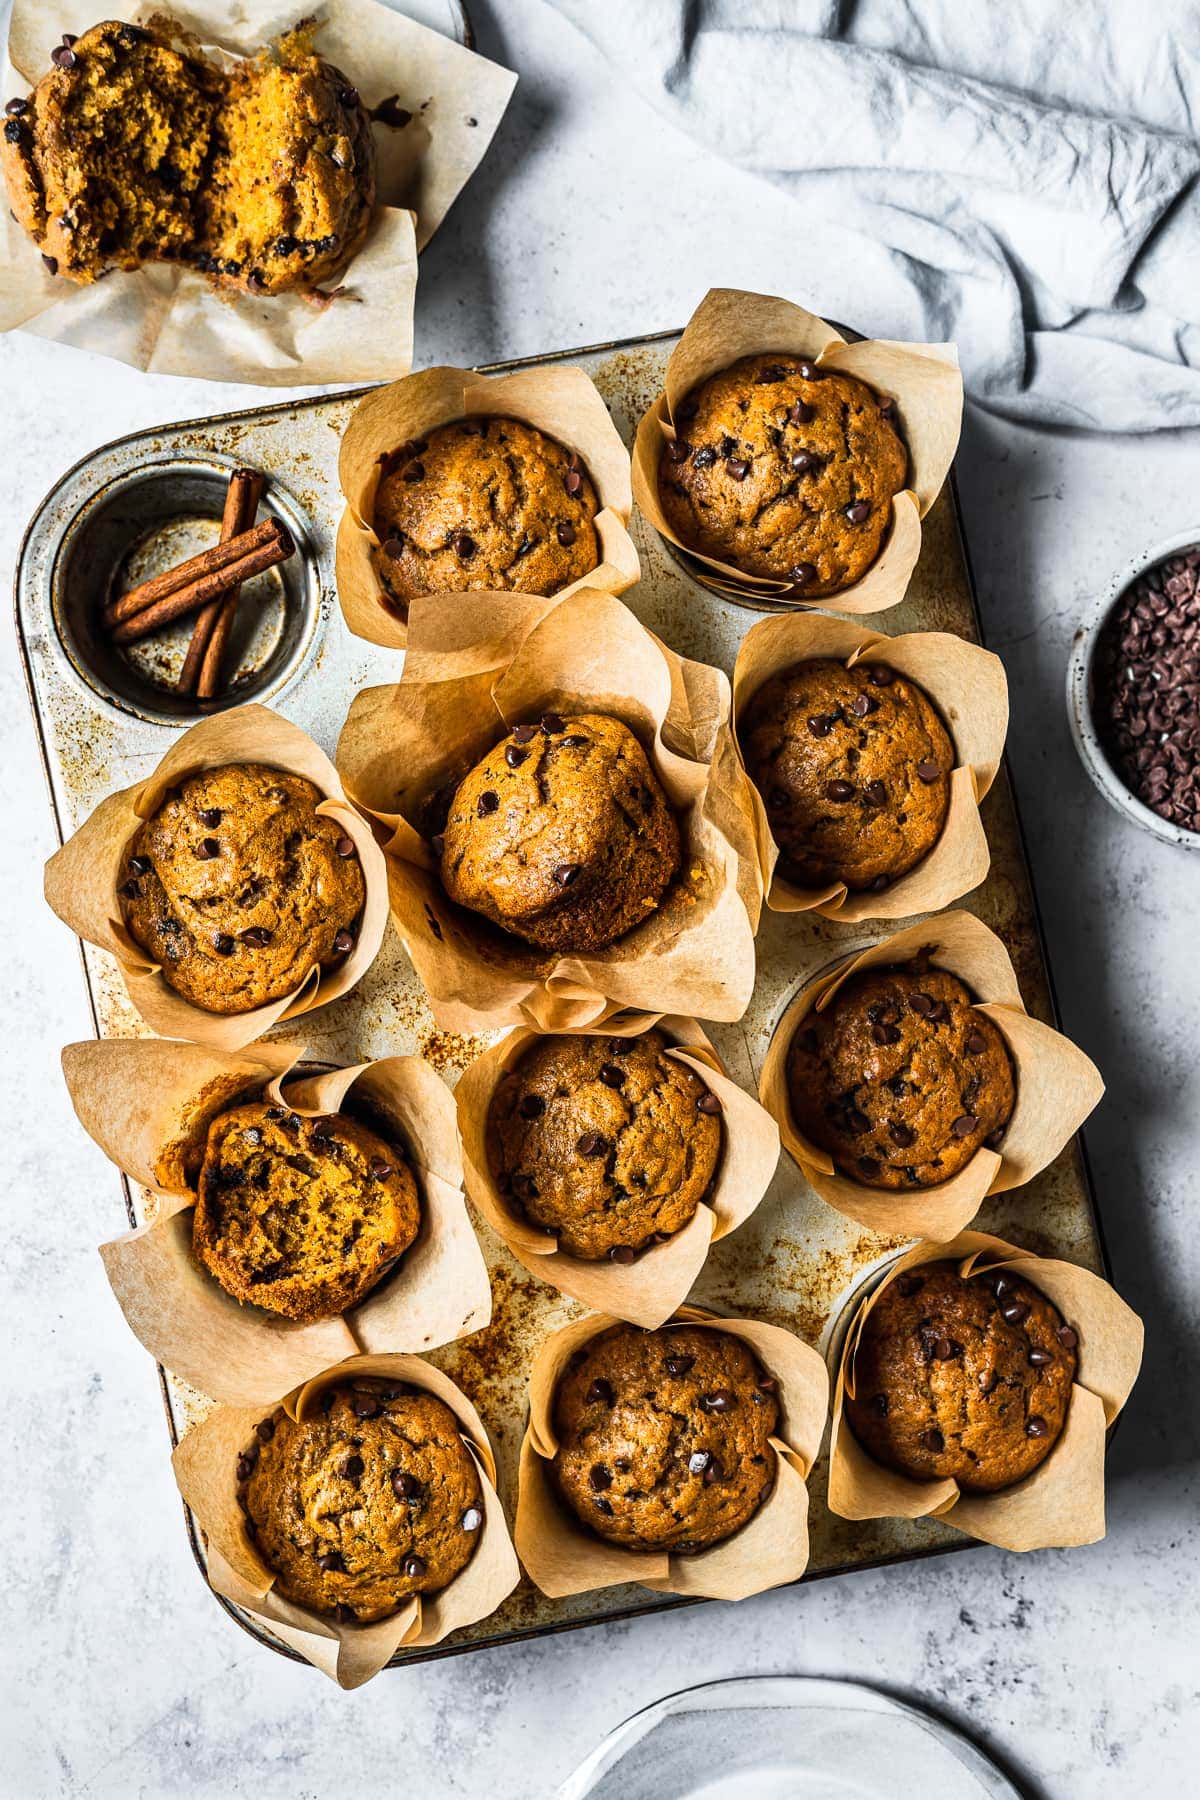 Baked pumpkin banana muffins in brown parchment liners in a muffin tin on a white stone surface. Surrounded by an opened muffin, a blue linen, a bowl of chocolate chips and a ceramic plate.